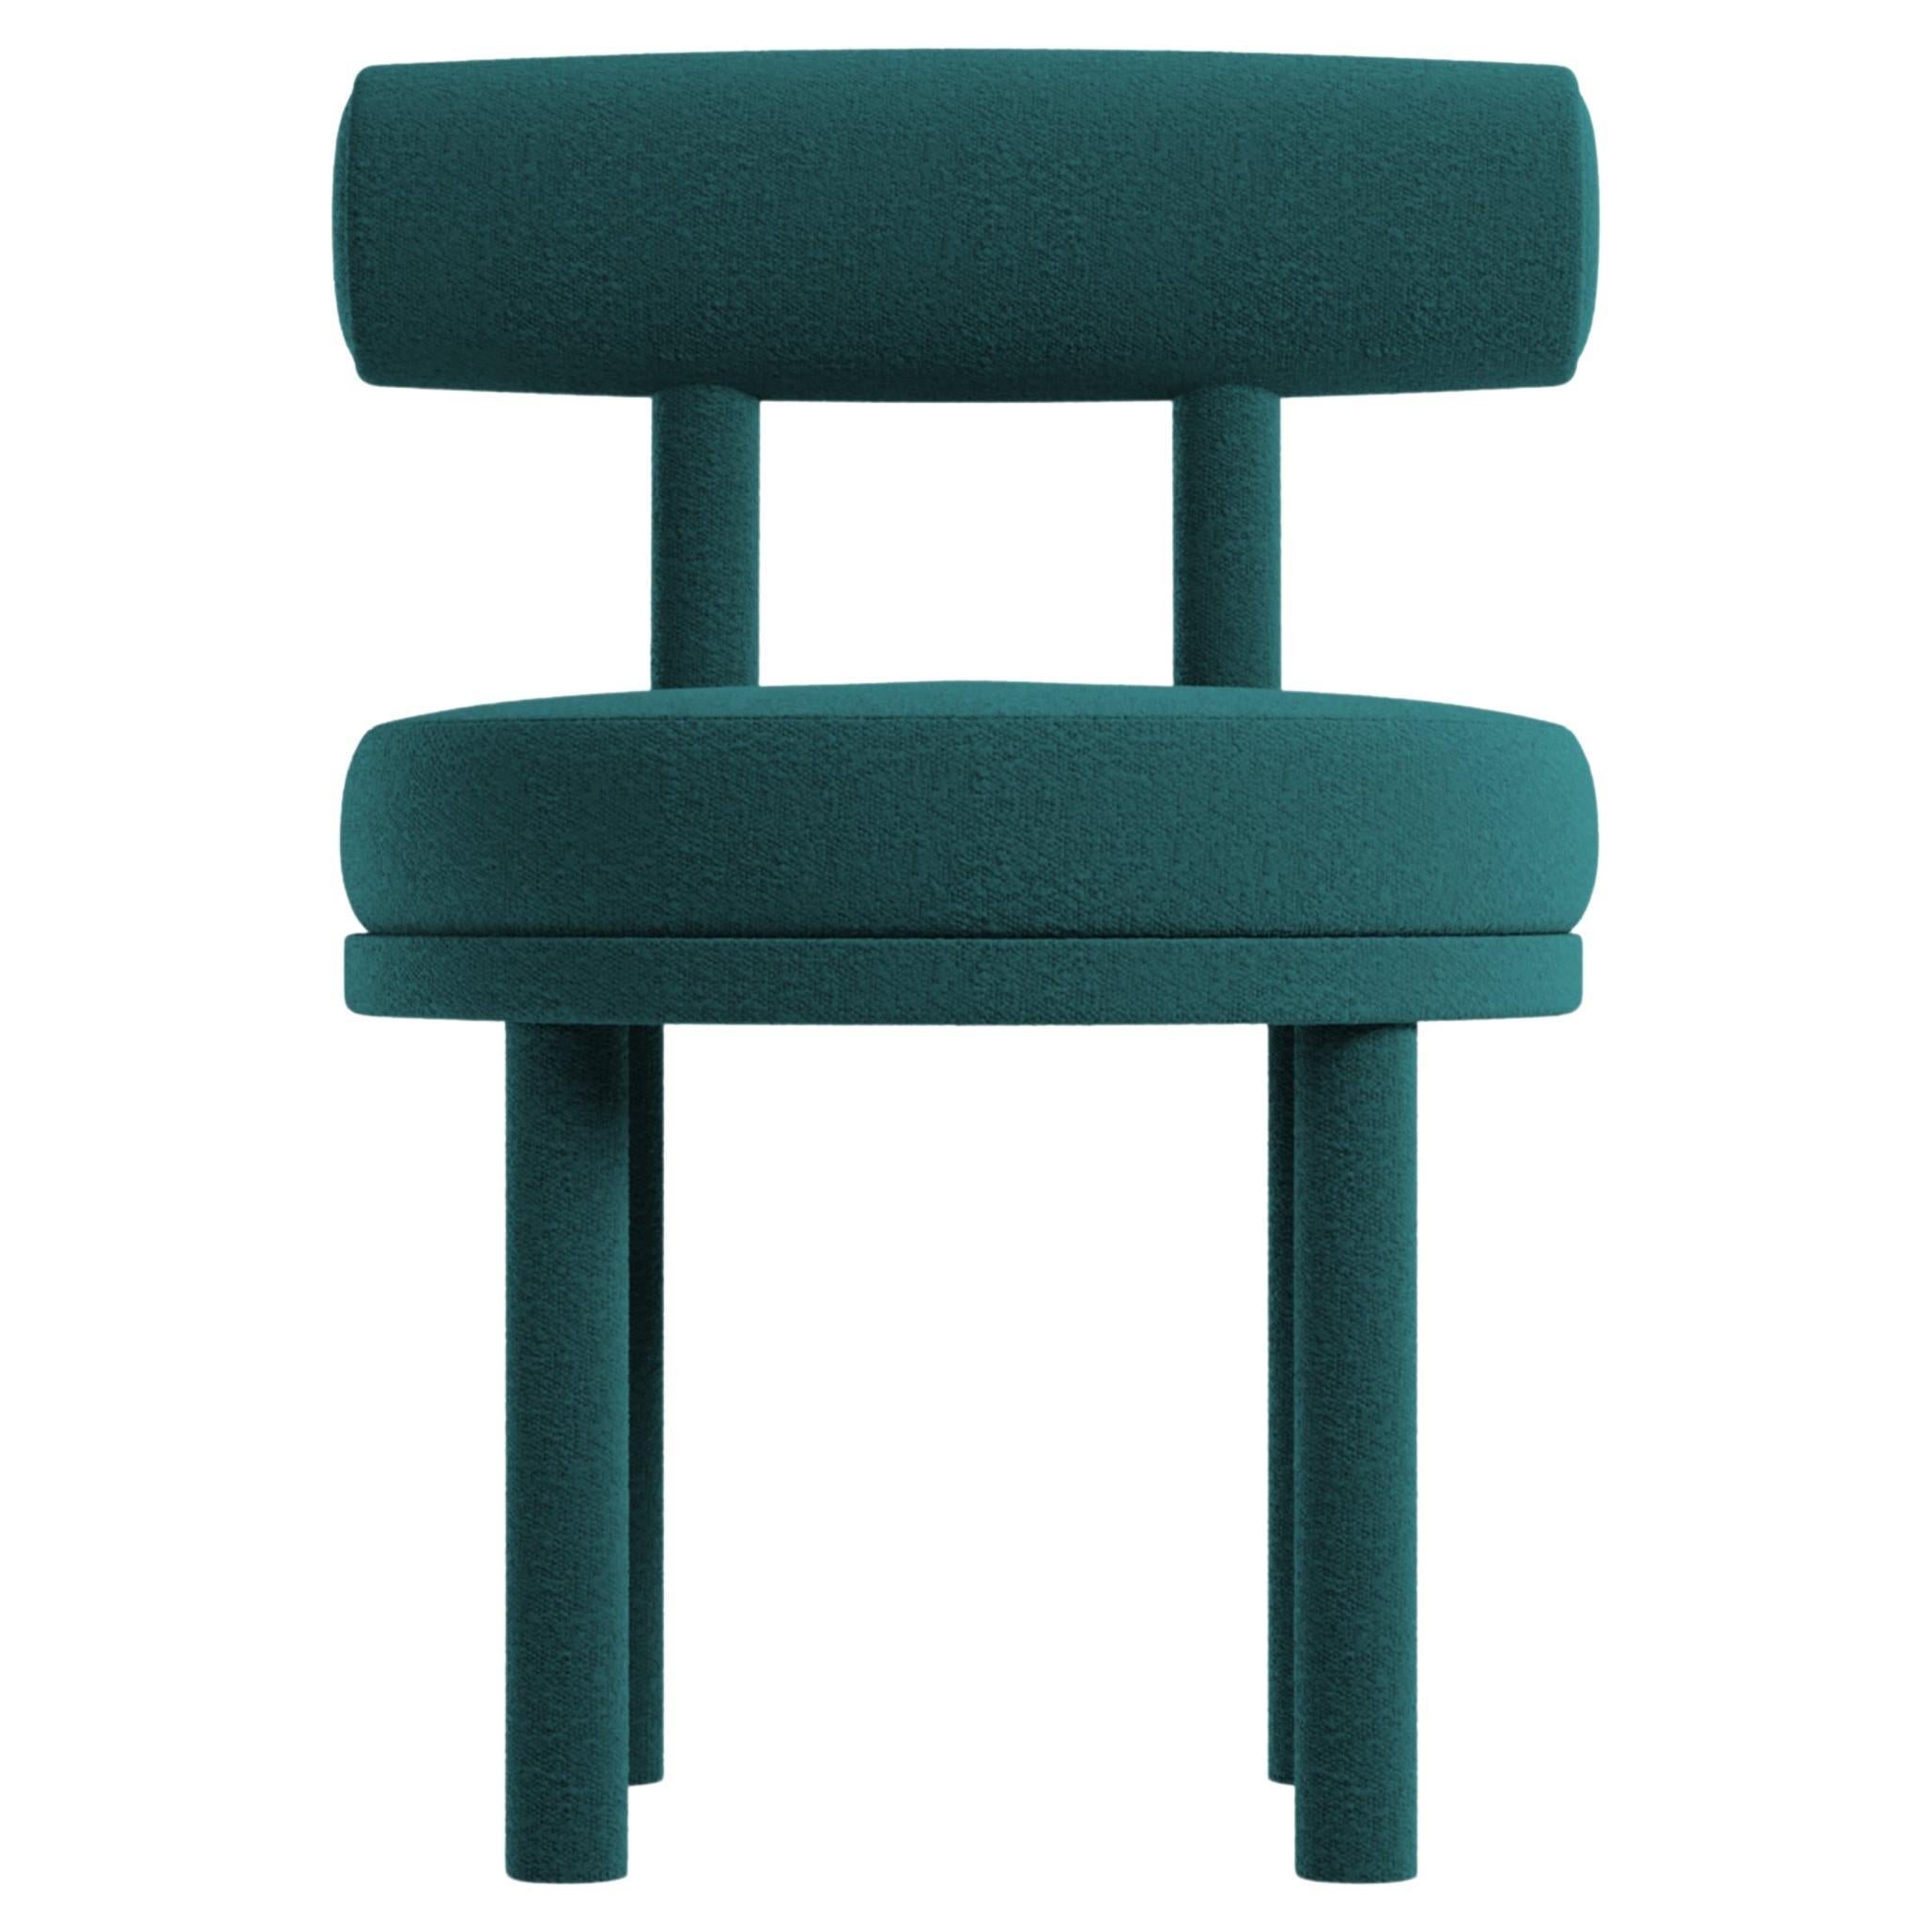 Collector Modern Moca Chair in Boucle Ocean Blue by Studio Rig